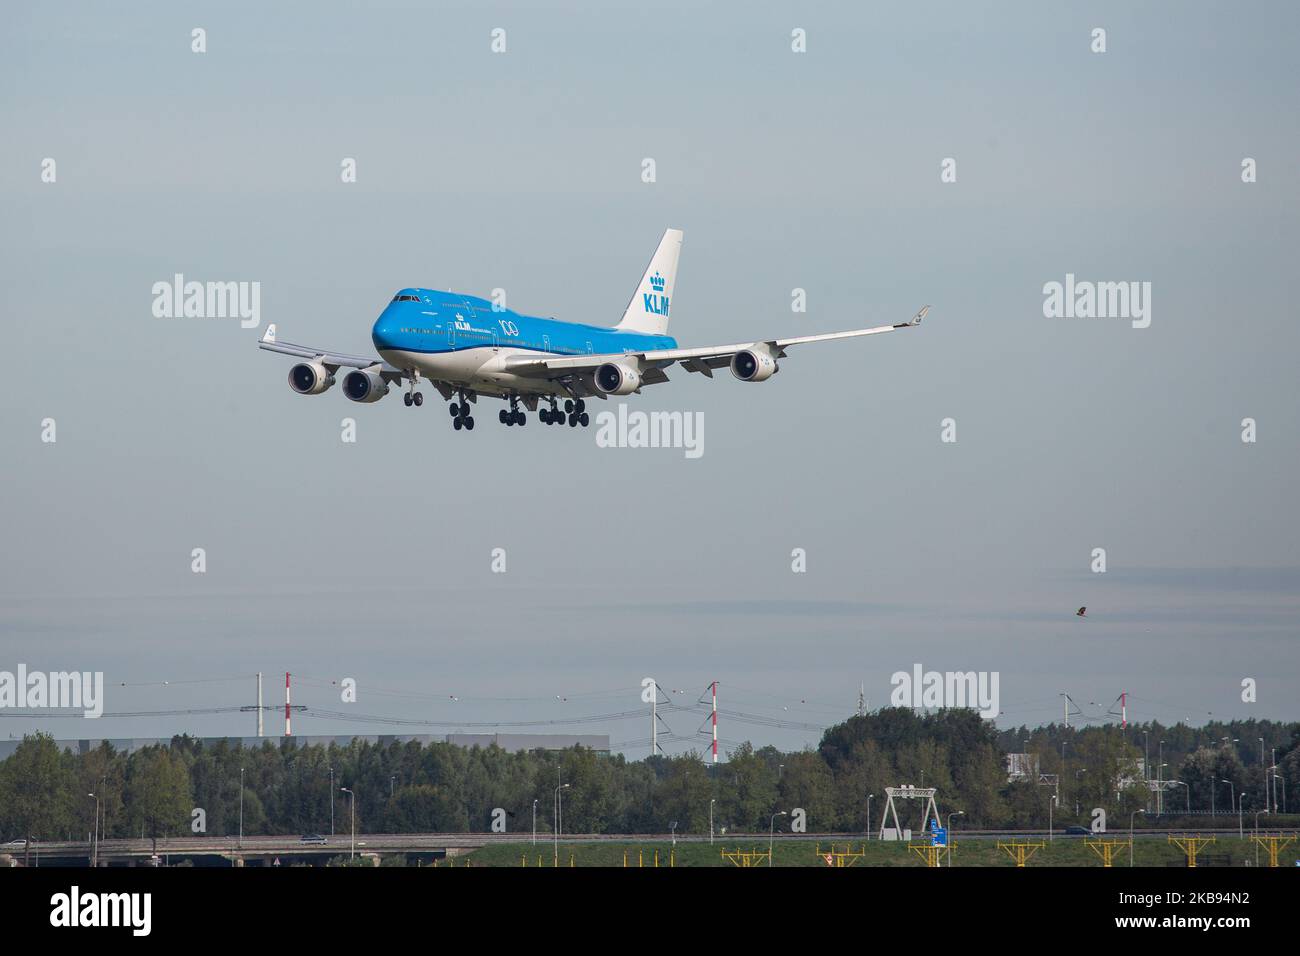 KLM Royal Dutch Airlines Boeing Jumbo Jet 747-400M airplane as seen on final approach landing, touch down and rubber smoke at Polderbaan runway 18R/36L from the landing gear wheels at Amsterdam Schiphol International Airport AMS EHAM in the Netherlands on 16 October 2019. The wide-body, heavy, long-haul 747 or B744 aircraft has the registration PH-BFT, the name Tokyo / City of Tokyo, has a 4x GE CF6-80 engines and a 100 years anniversary logo sticker on the fuselage. The airliner is a mixed passenger and Freight or Combi variant. KLM KL Koninklijke Luchtvaart Maatschappij airline is the flag c Stock Photo